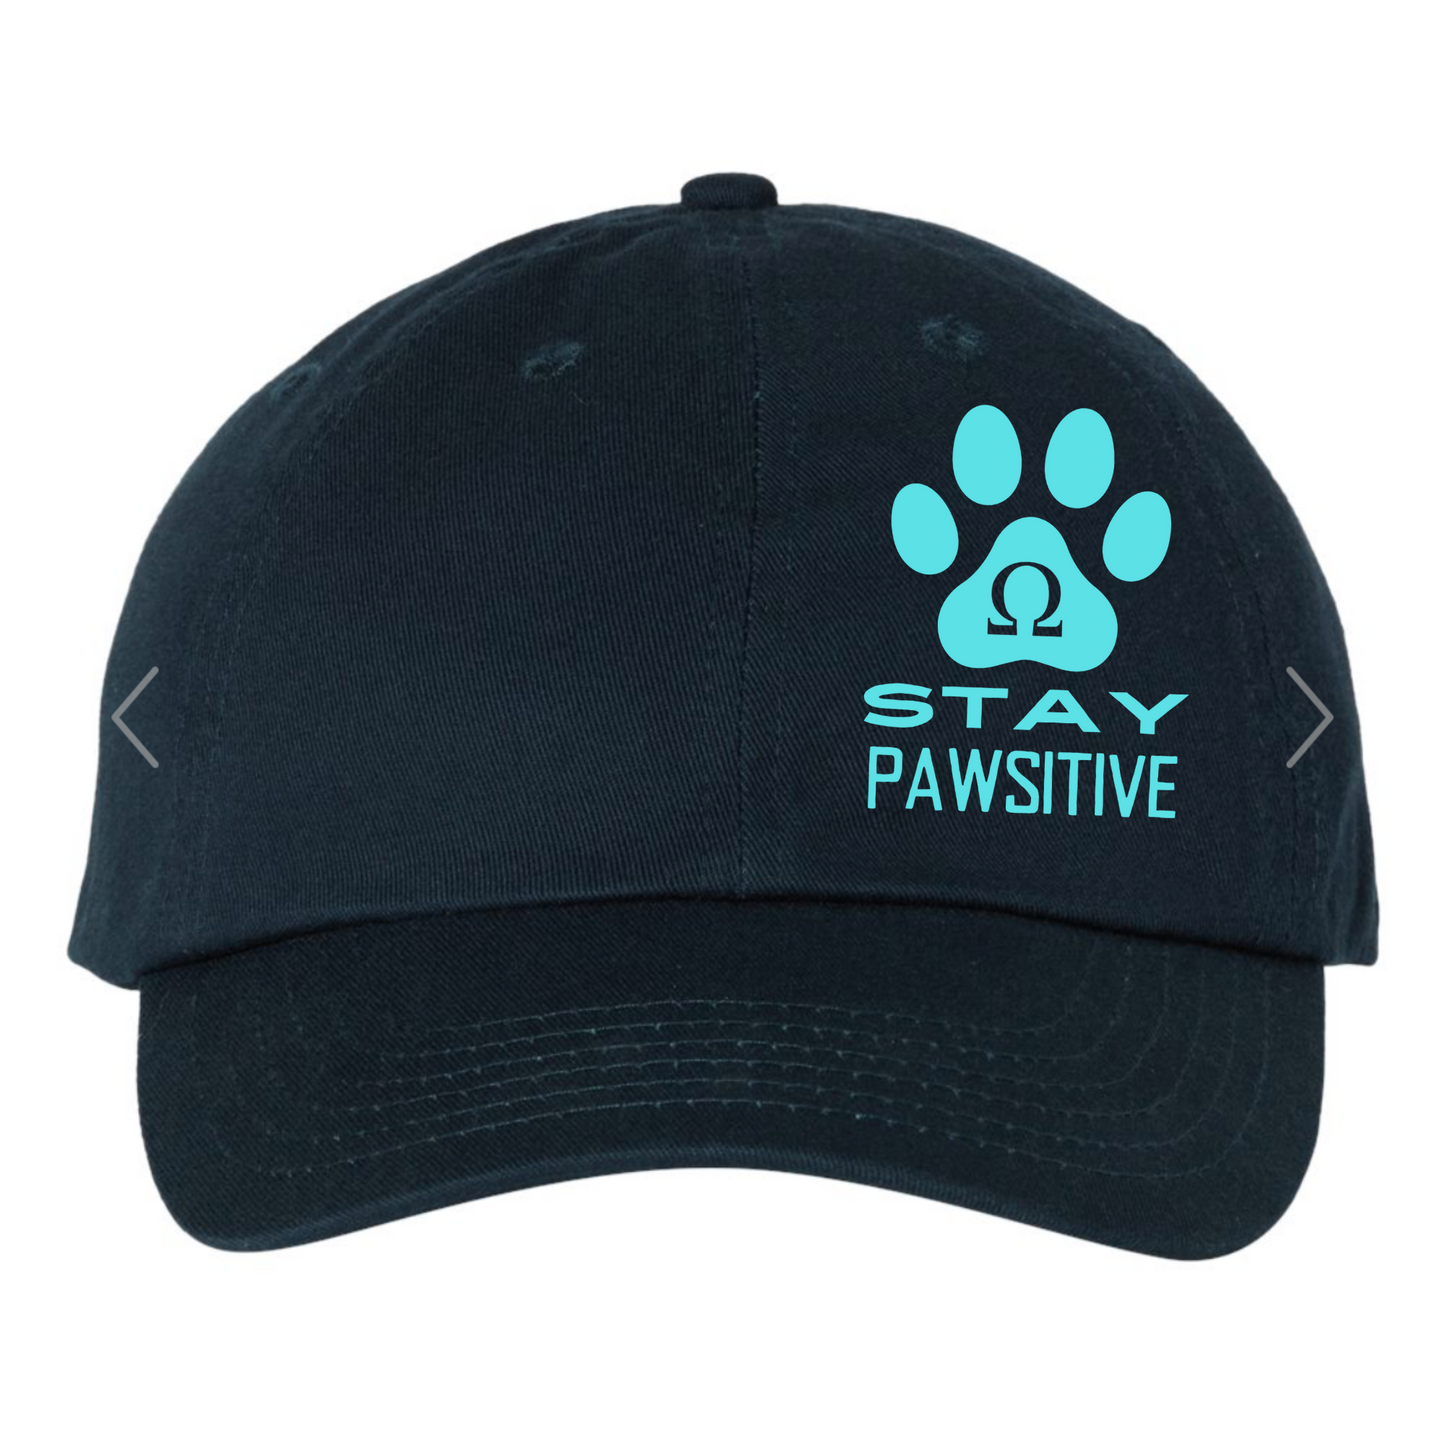 Stay PAWsitive Dad Cap